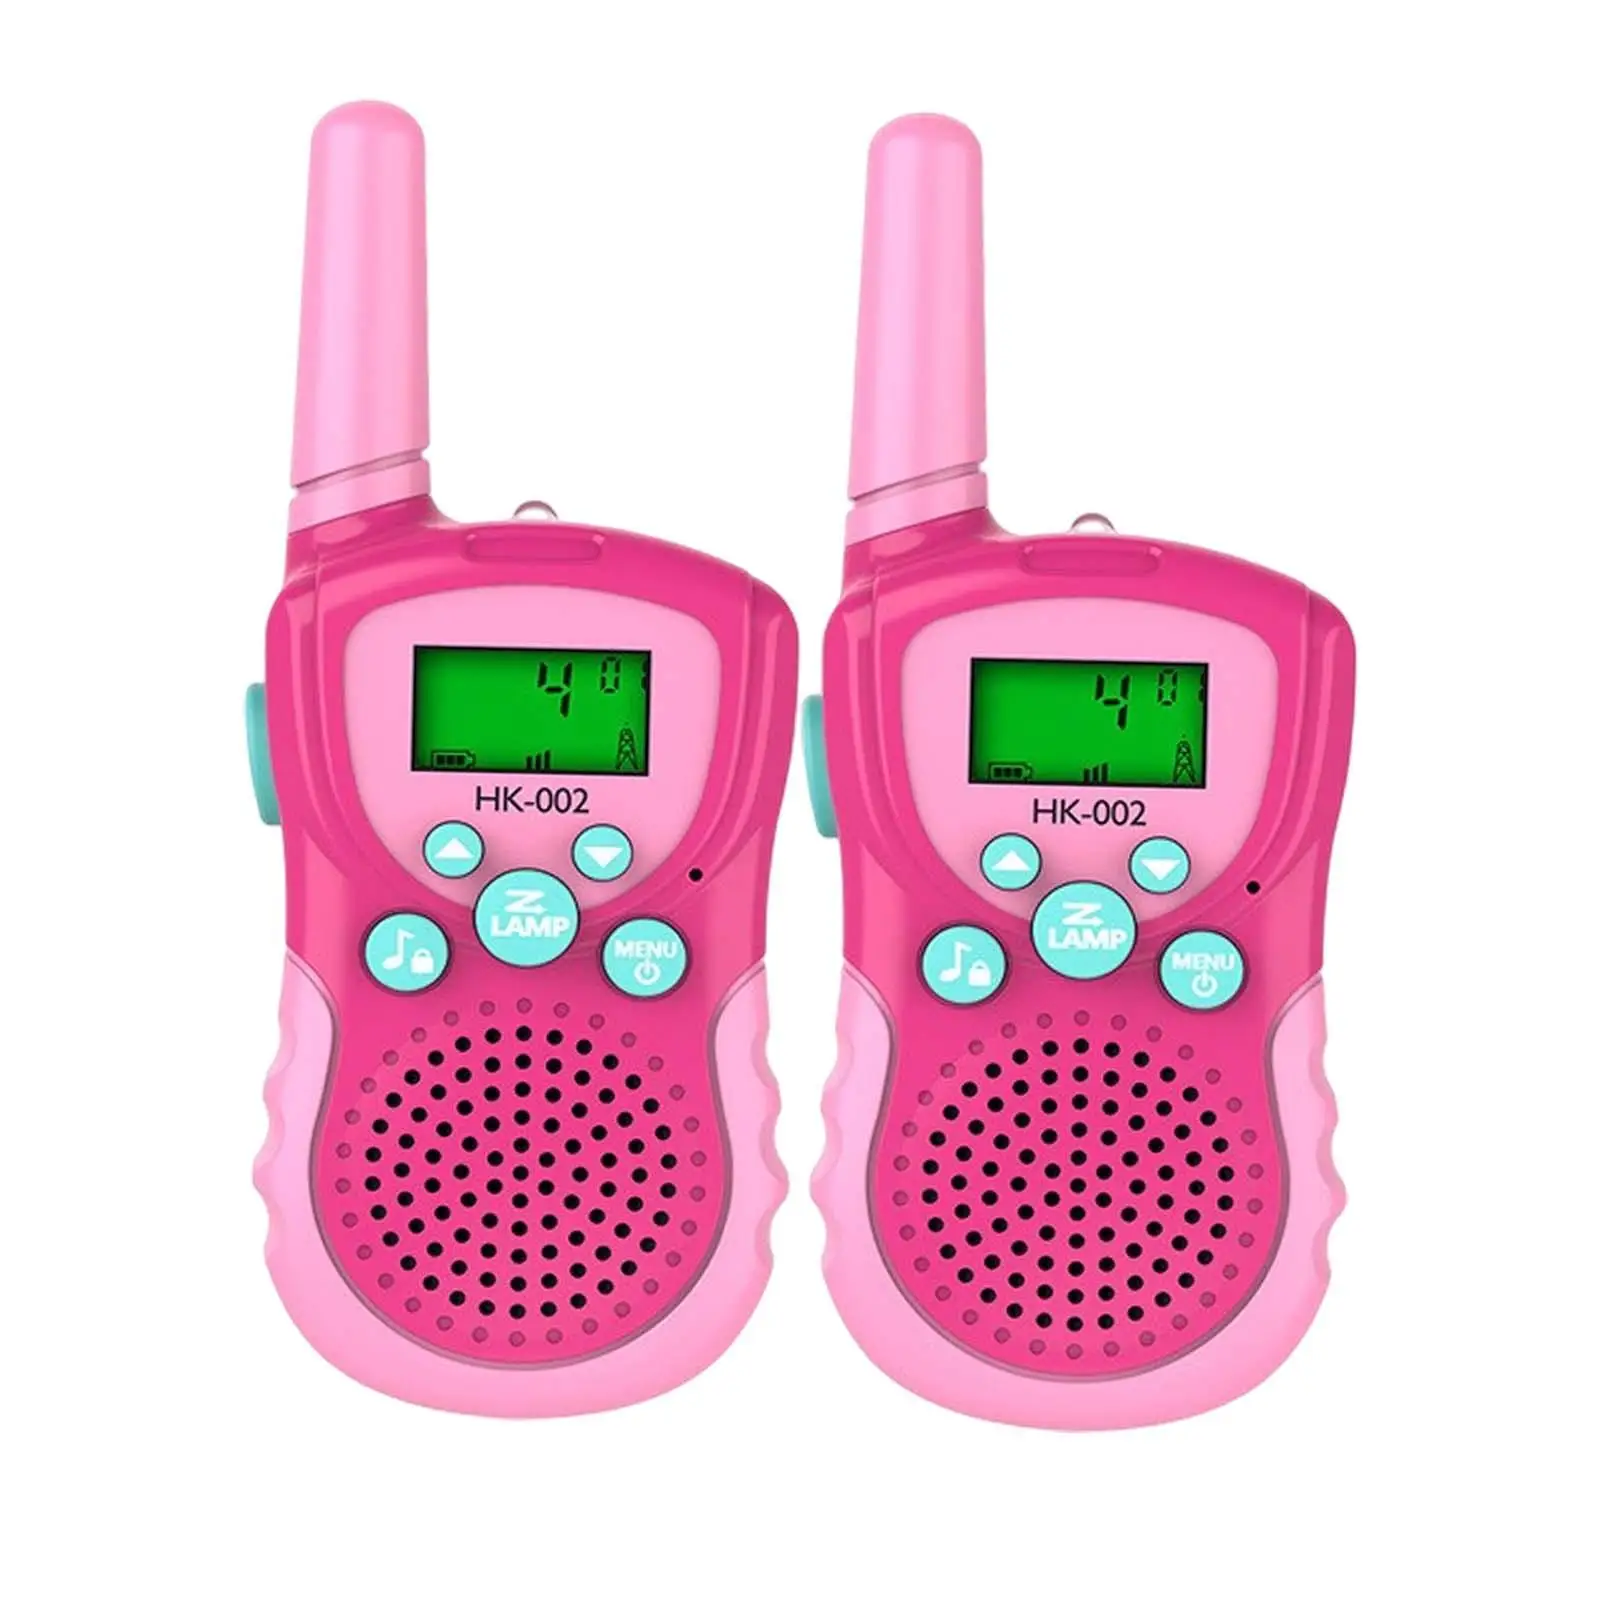 2Pcs Kids Walkie Talkie 22 Channels Easy to Use Long Distance 2km Birthday Gift 2 Way Radio Toys for Games 3-14 Years Old Hiking